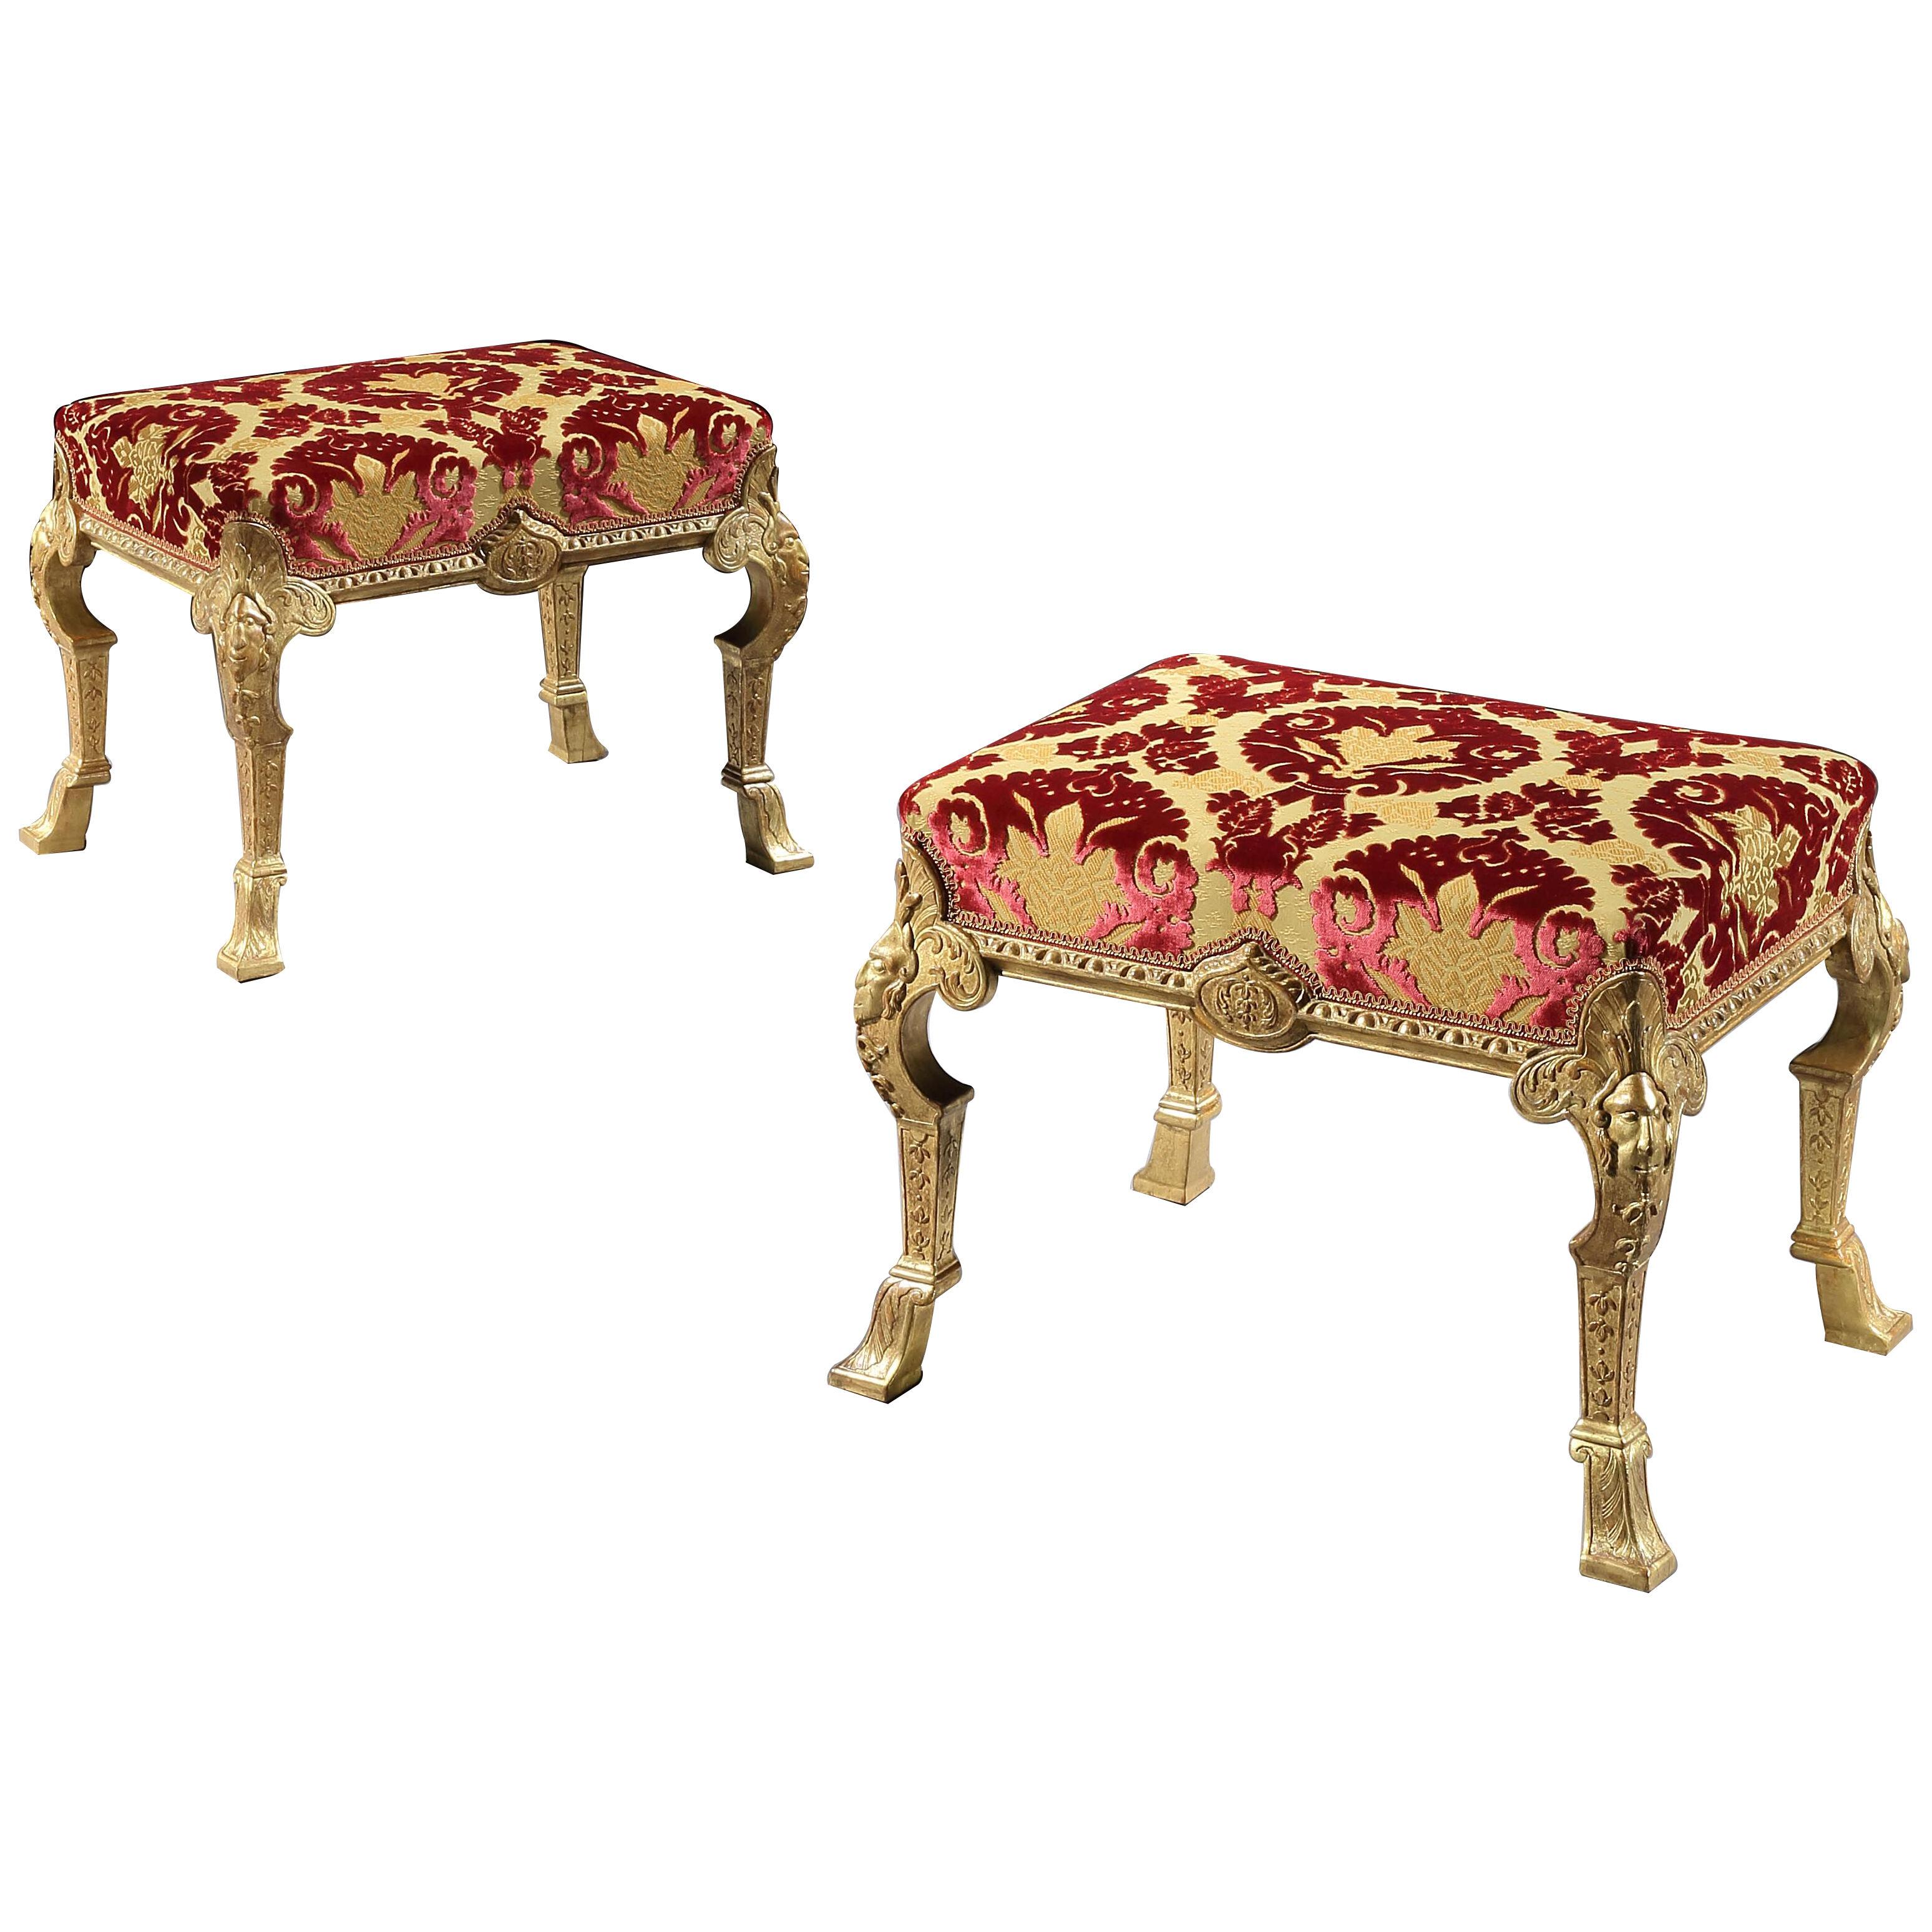 A PAIR OF GEORGE I GESSO STOOLS